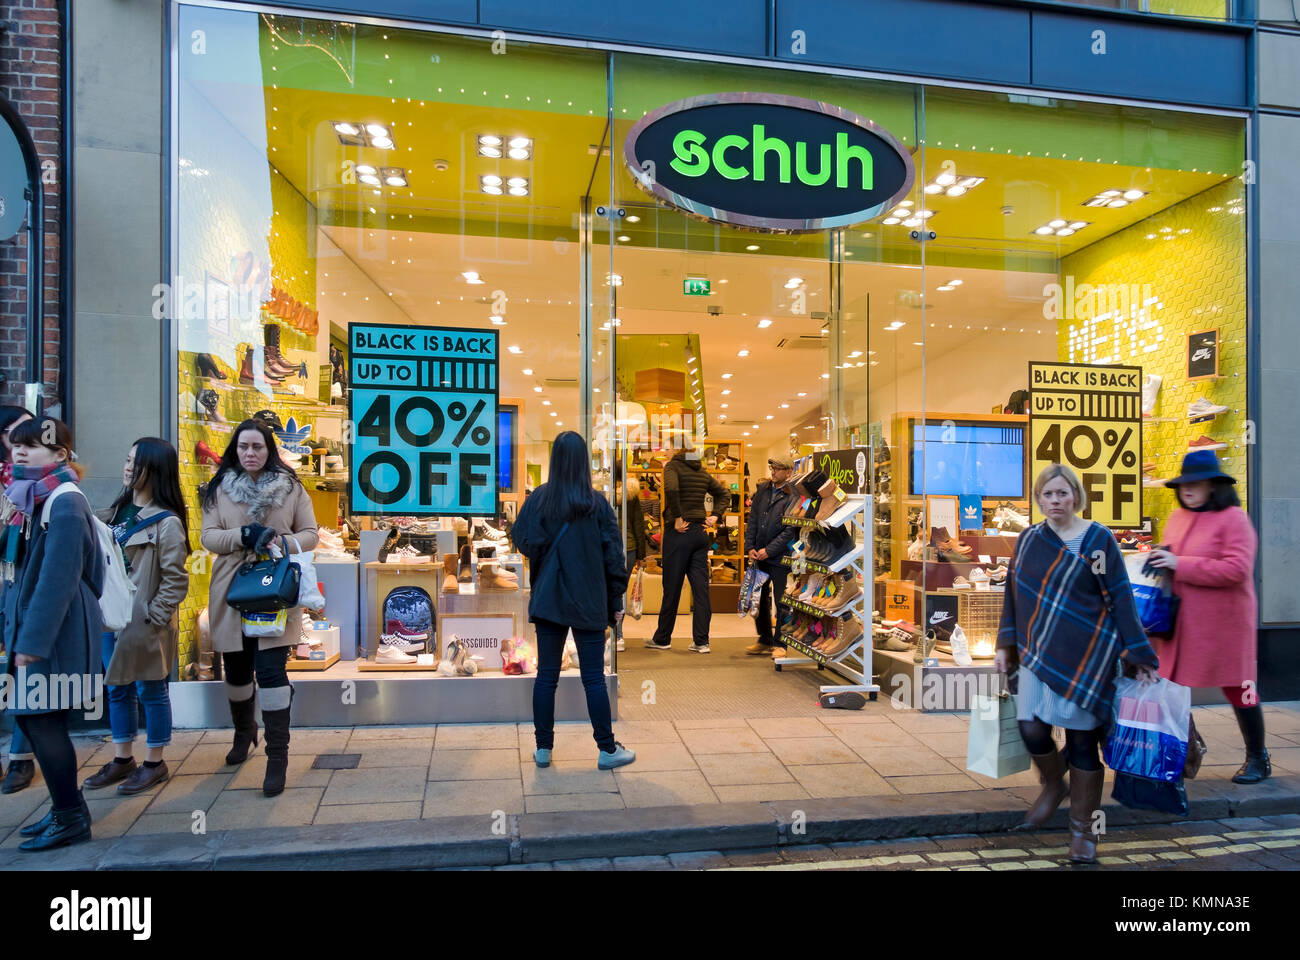 Black Friday sale signs sign on Schuh shoe shop store window England UK United Kingdom GB Great Britain Stock Photo